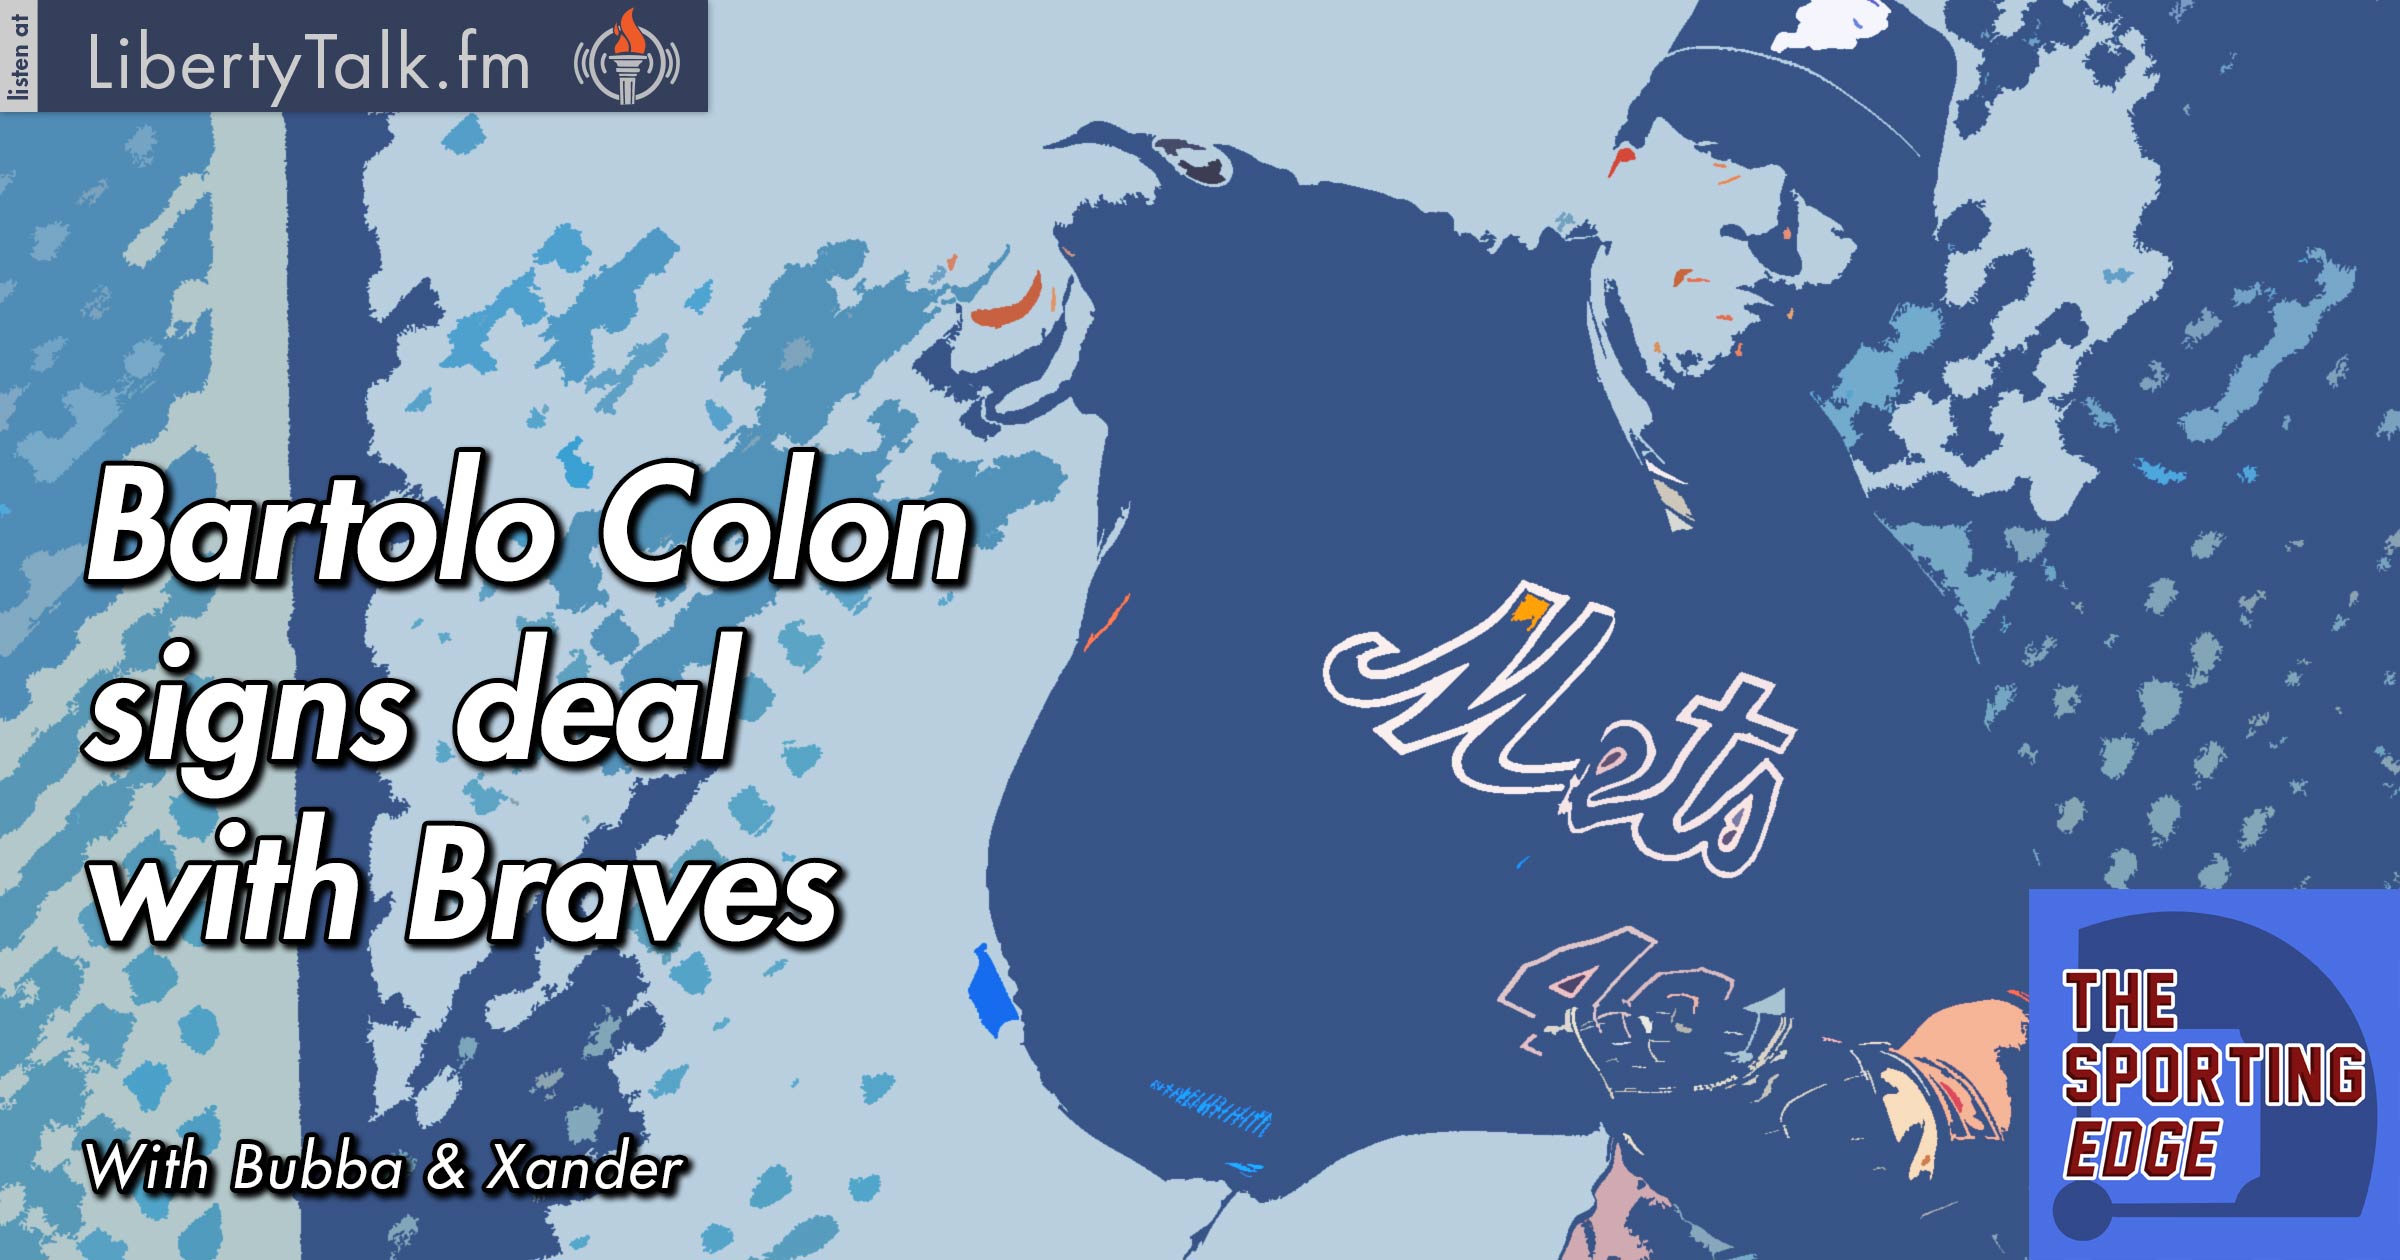 Bartolo Colon signs deal with Braves - The Sporting Edge